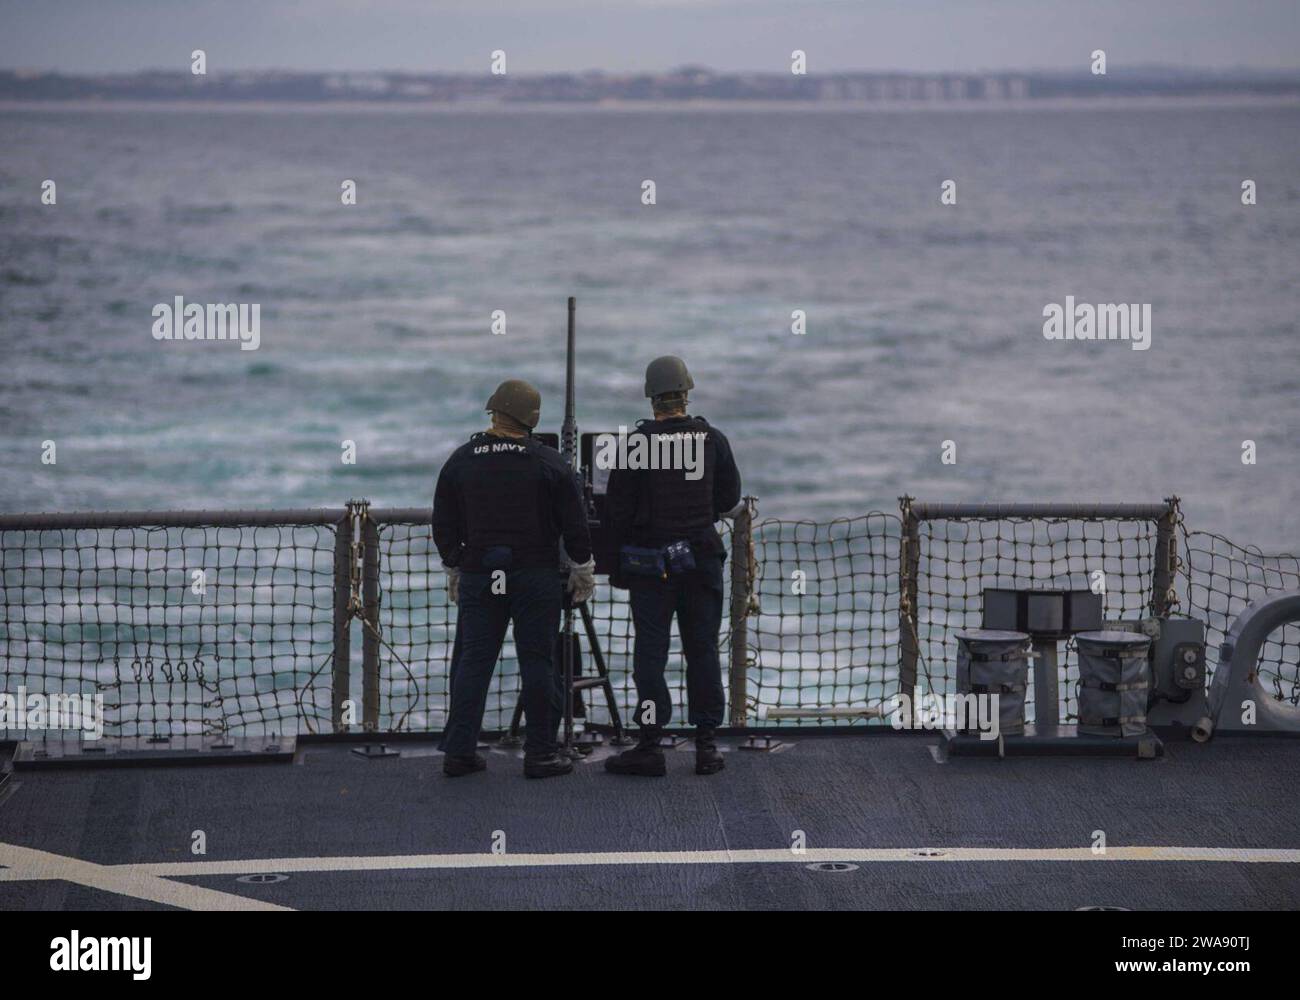 US military forces. 180212KA046-0075  NAVAL STATION ROTA, Spain (Feb. 12, 2018) Р Ship's Serviceman 1st Class Isaac Payne, left, and Logistic's Specialist Seaman Darnell Thomas man a .50 caliber machine gun aboard the Arleigh Burke-class guided-missile destroyer USS Carney (DDG 64), while departing Rota, Spain, Feb. 12, 2018. Carney, forward-deployed to Rota, Spain, is on its fourth patrol in the U.S. 6th Fleet area of operations in support of regional allies and partners, and U.S. national security interests in Europe. (U.S. Navy photo by Mass Communication Specialist 2nd Class James R. Turne Stock Photo